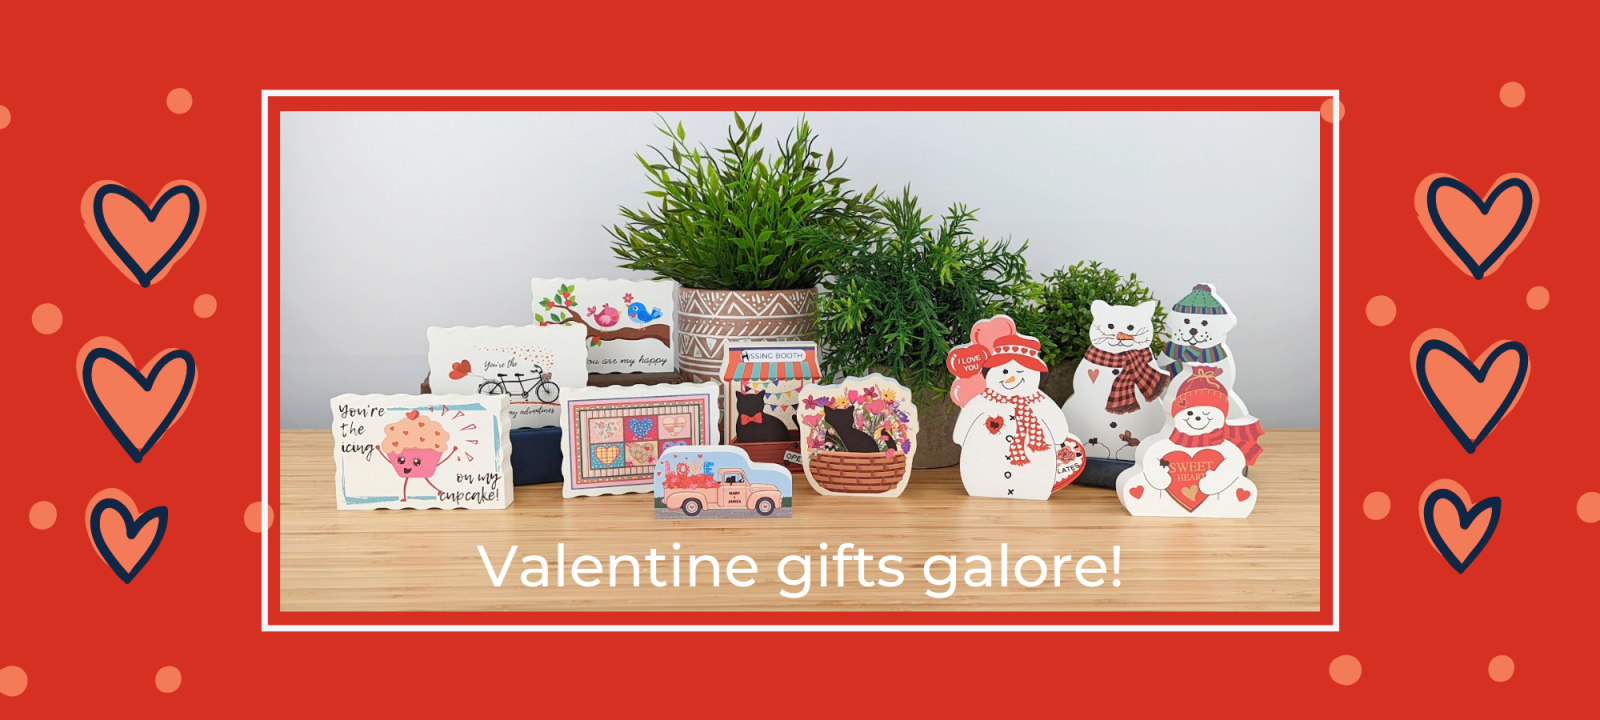 Get your paws on the best Valentine's gifts ever...there's even personalization options.